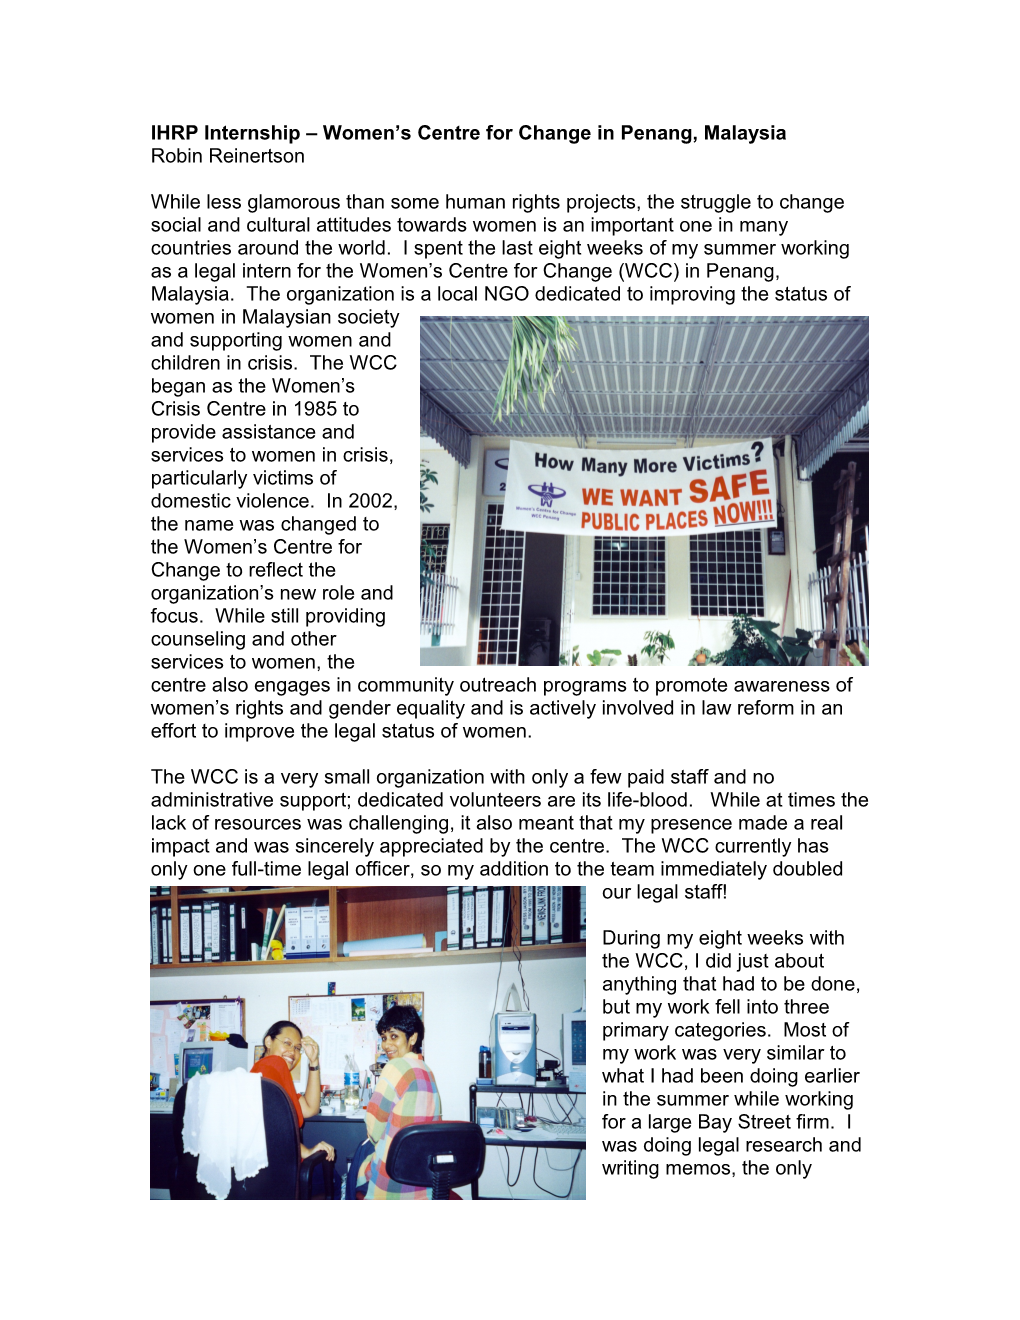 IHRP Internship Women S Centre for Change in Penang, Malaysia